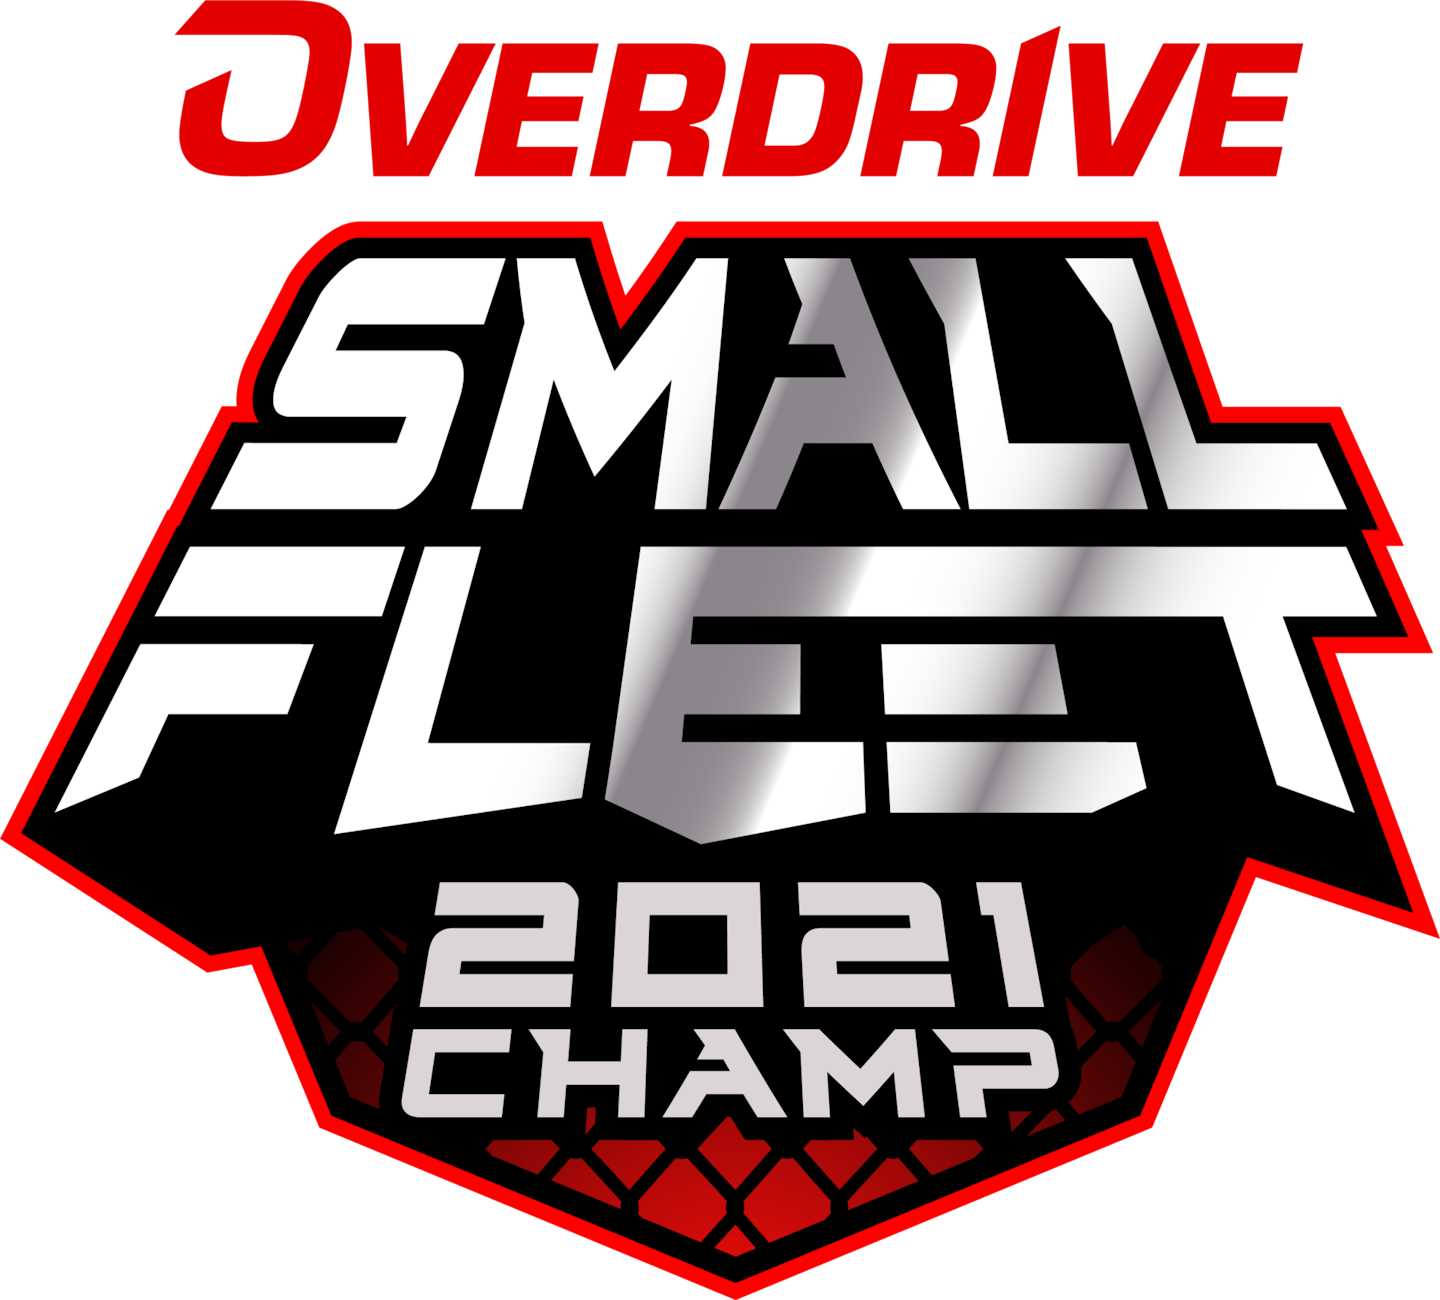 This is the last of 10 Small Fleet Champ semi-finalist profiles here on Overdrive prior to the soon-coming announcement of the finalists. Access all of the profiles via this link. The final winner will be announced at the Nov. 4-6 conference of the National Association of Small Trucking Companies in Nashville, Tennessee.